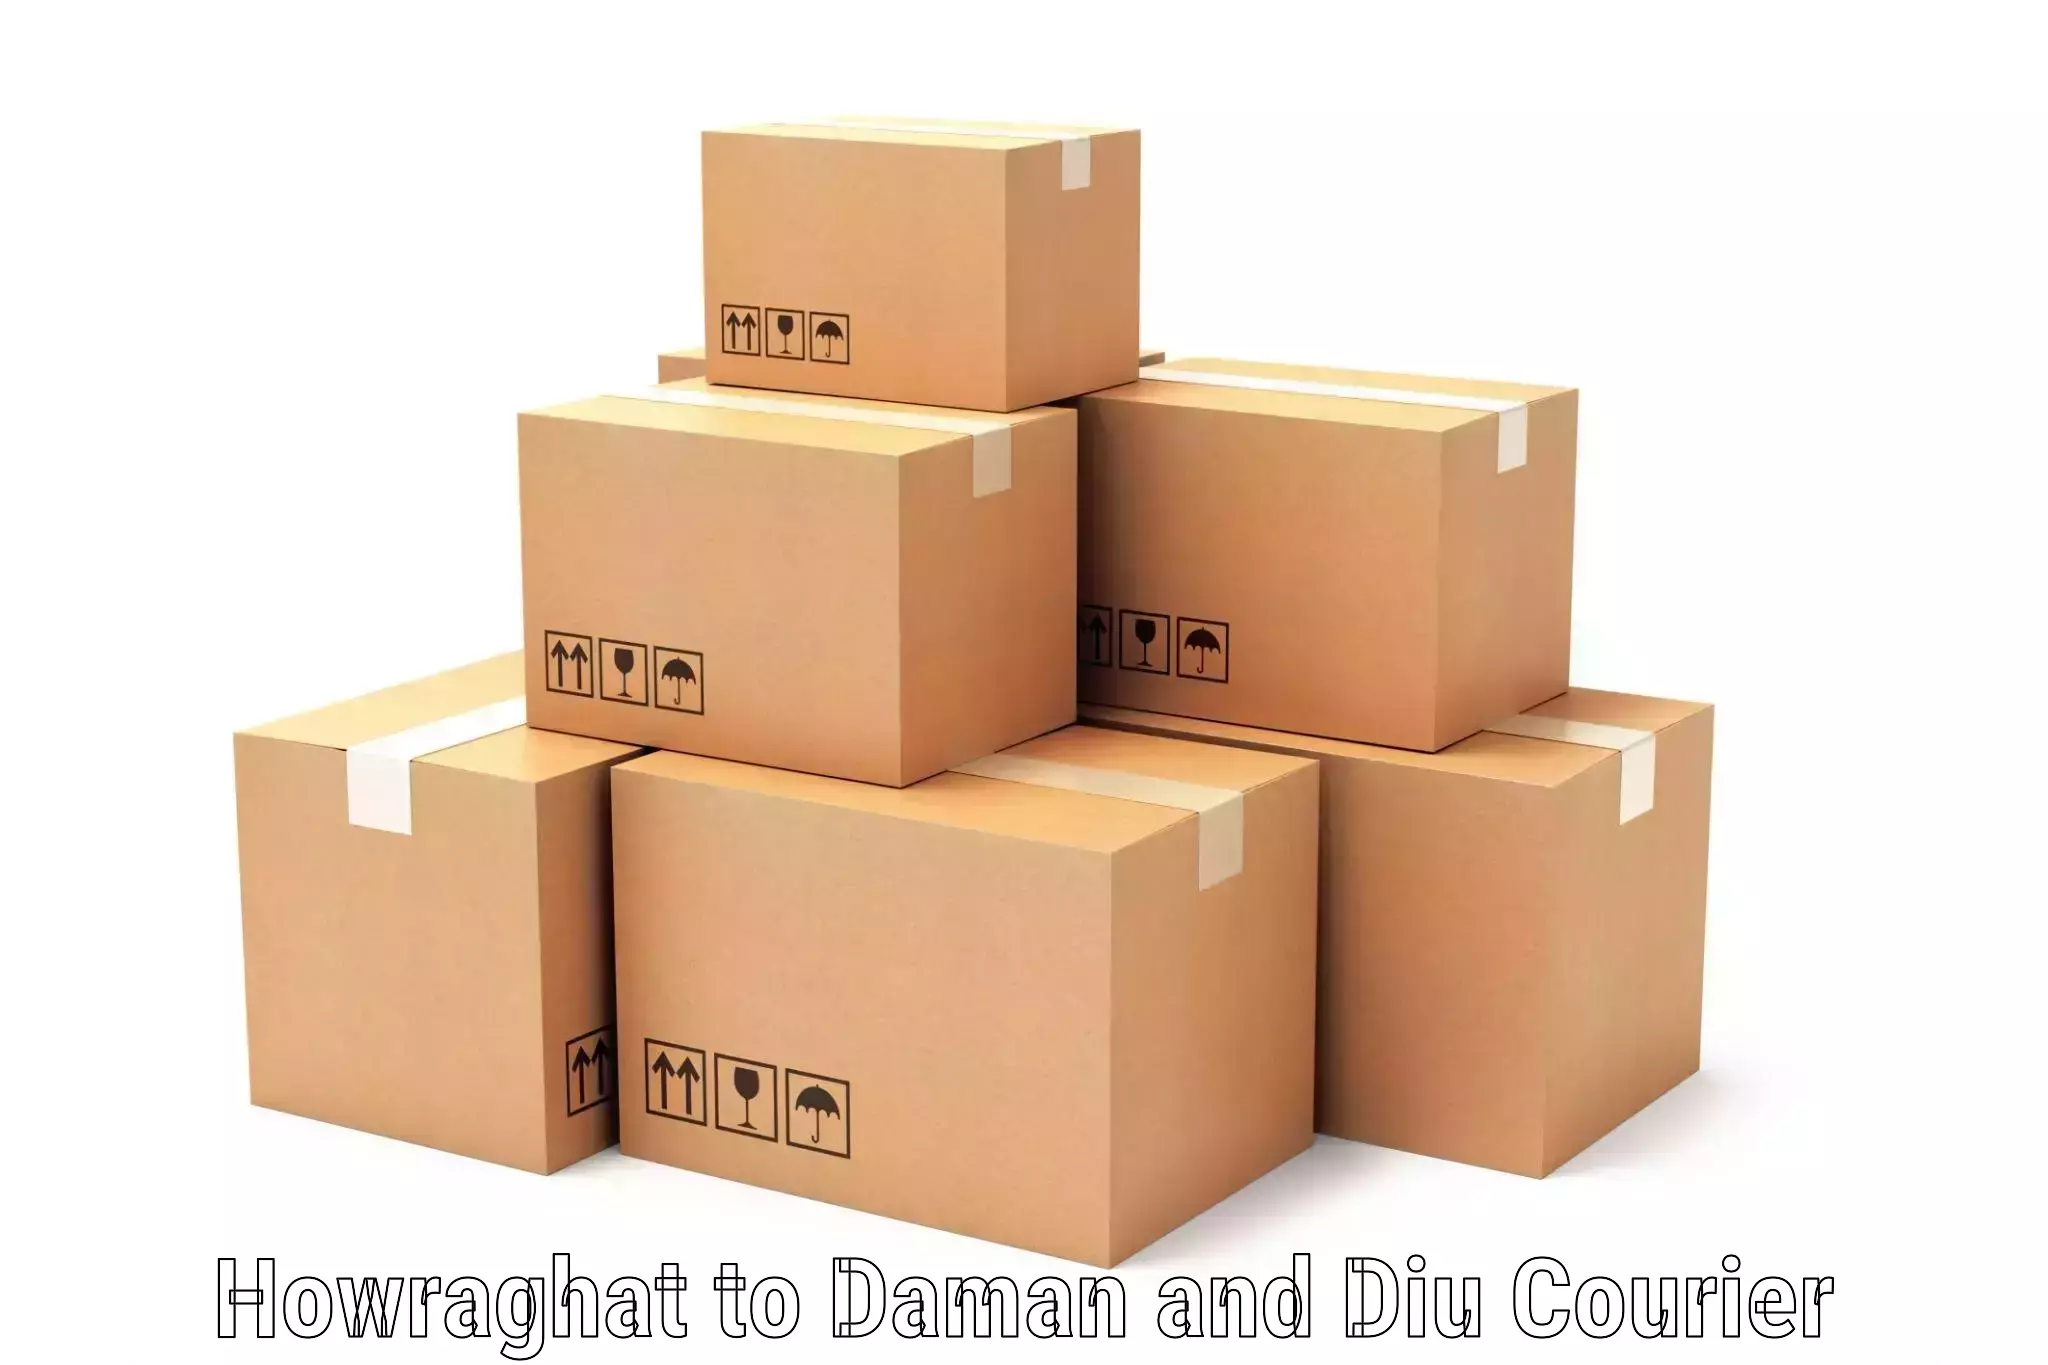 Courier rate comparison Howraghat to Diu